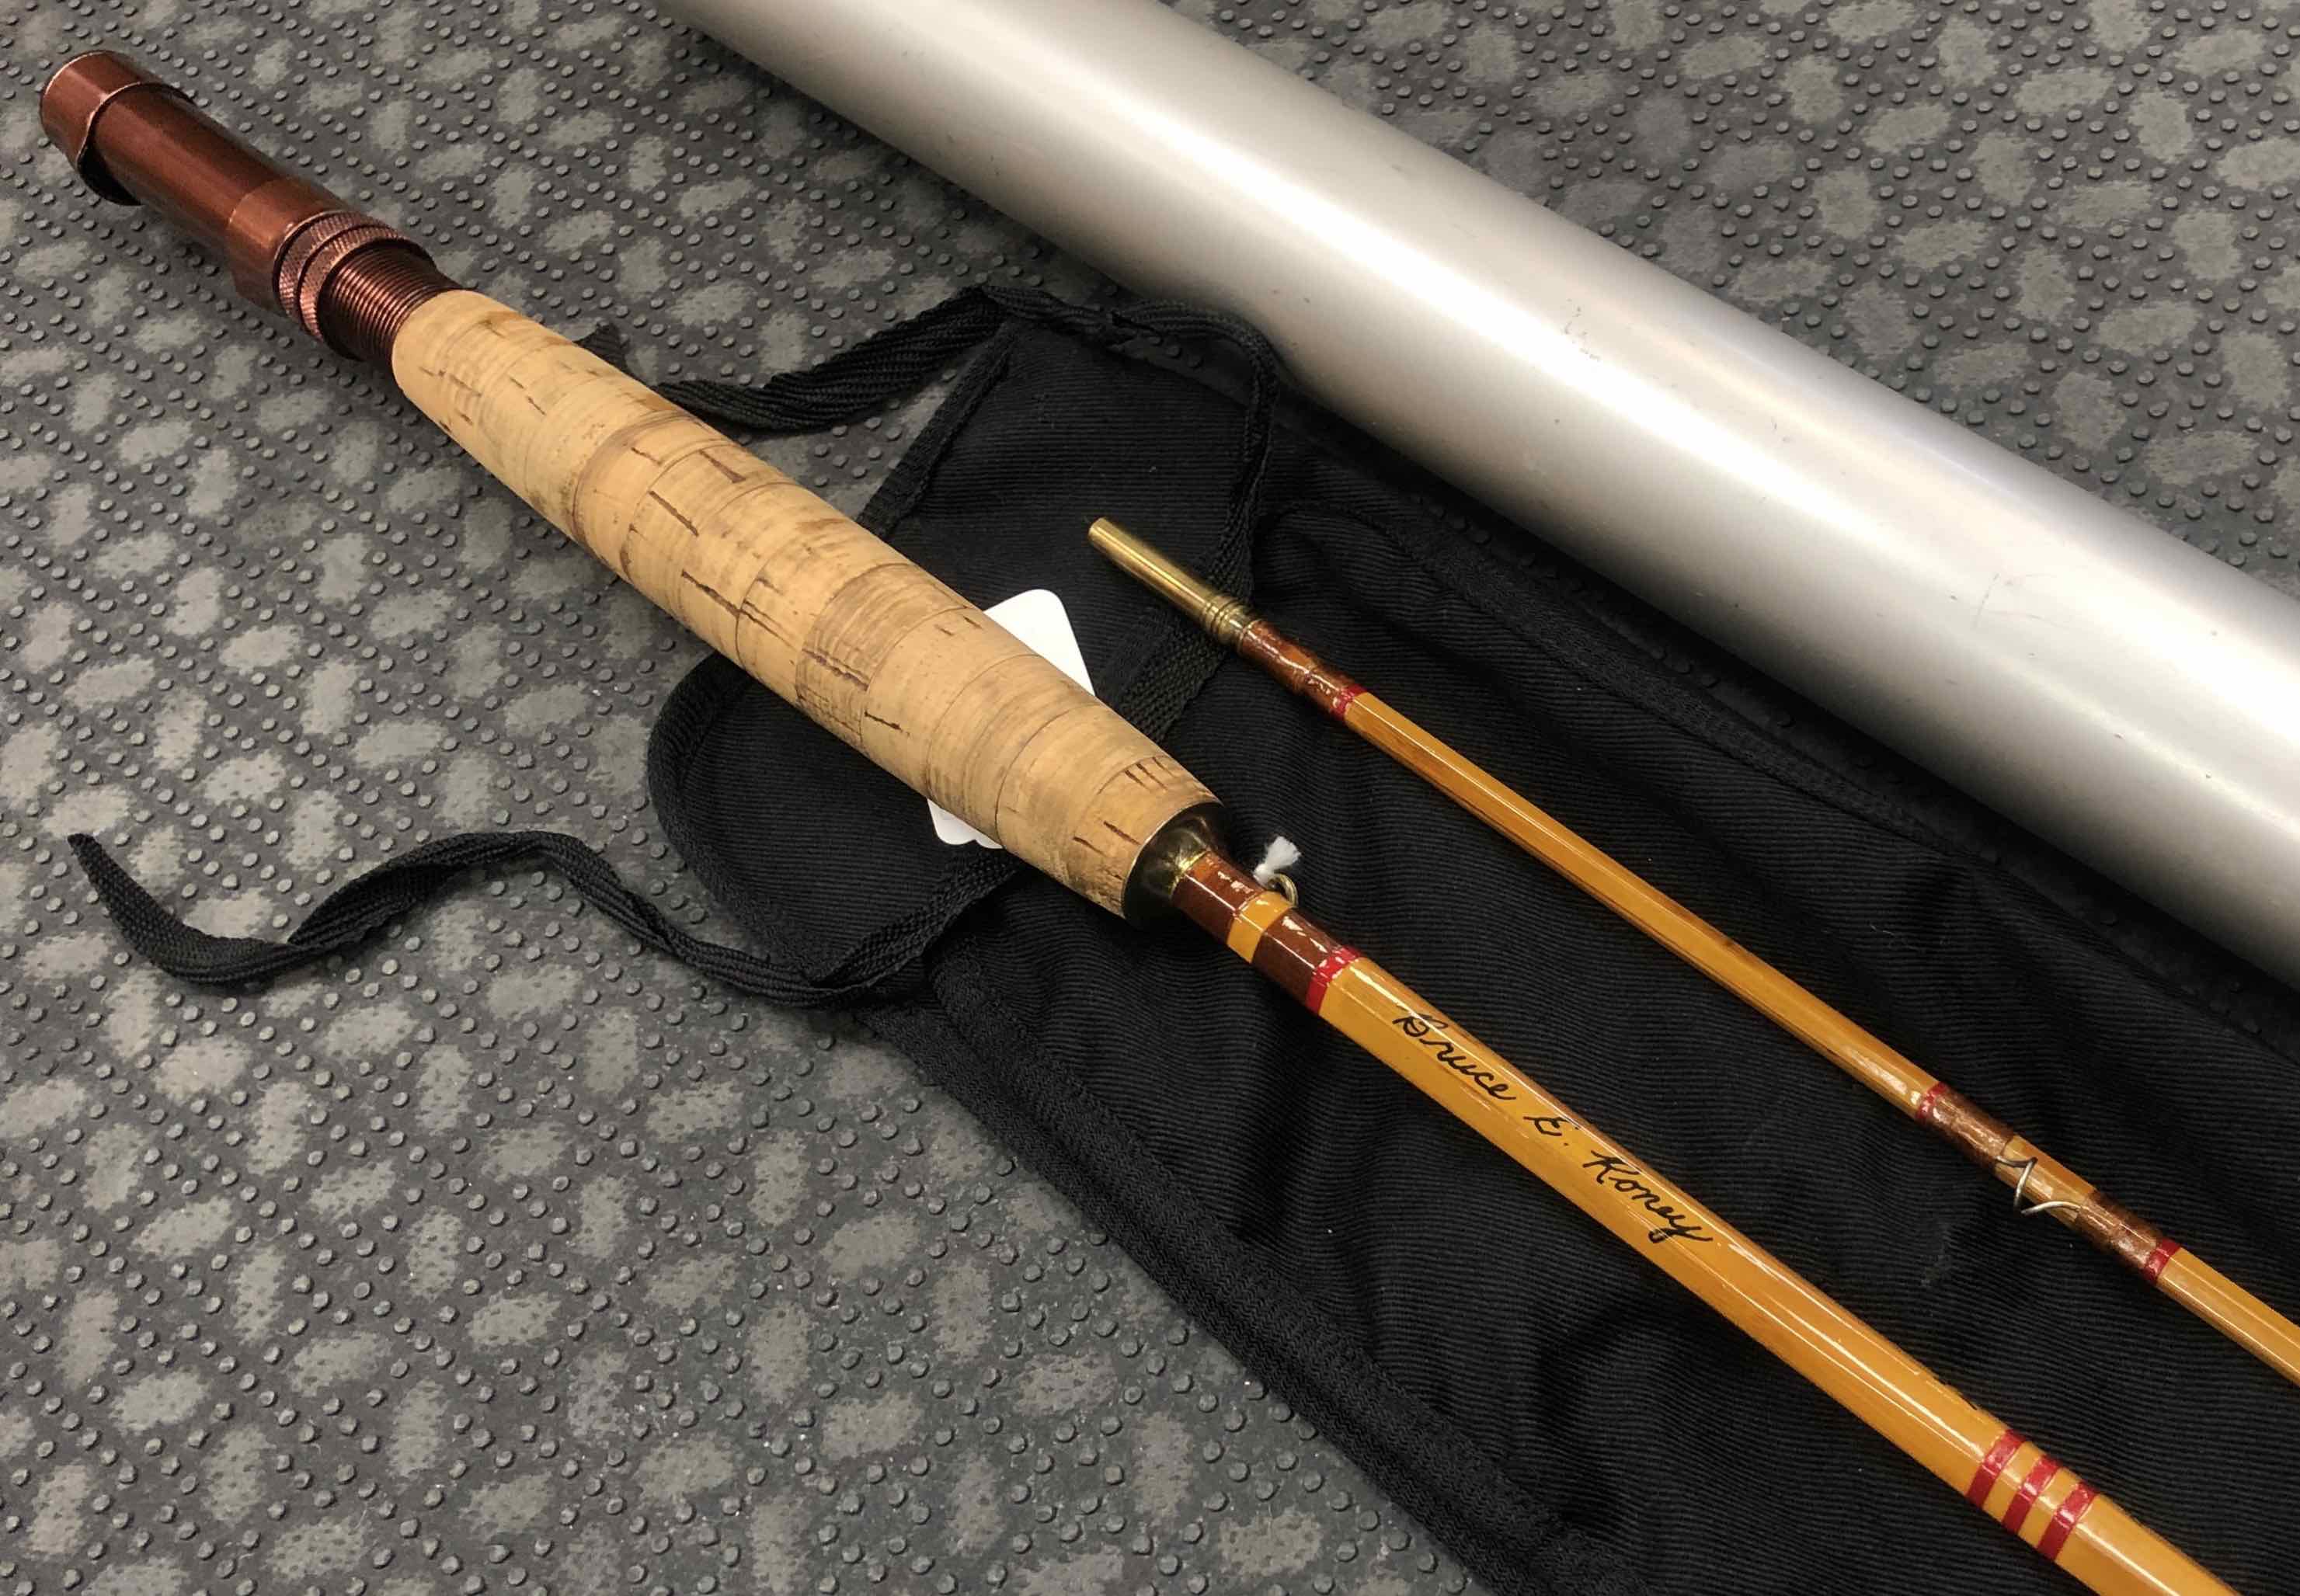 Bamboo Cane Rod Fly Rod - Built by Owner From Genuine Tonkin Cane in 1975 - 2Pc - 9’ - 5Wt - "Dry Fly Action" - C/W Sock & Aluminum Tube - BEAUTIFUL CONDITION! - $280